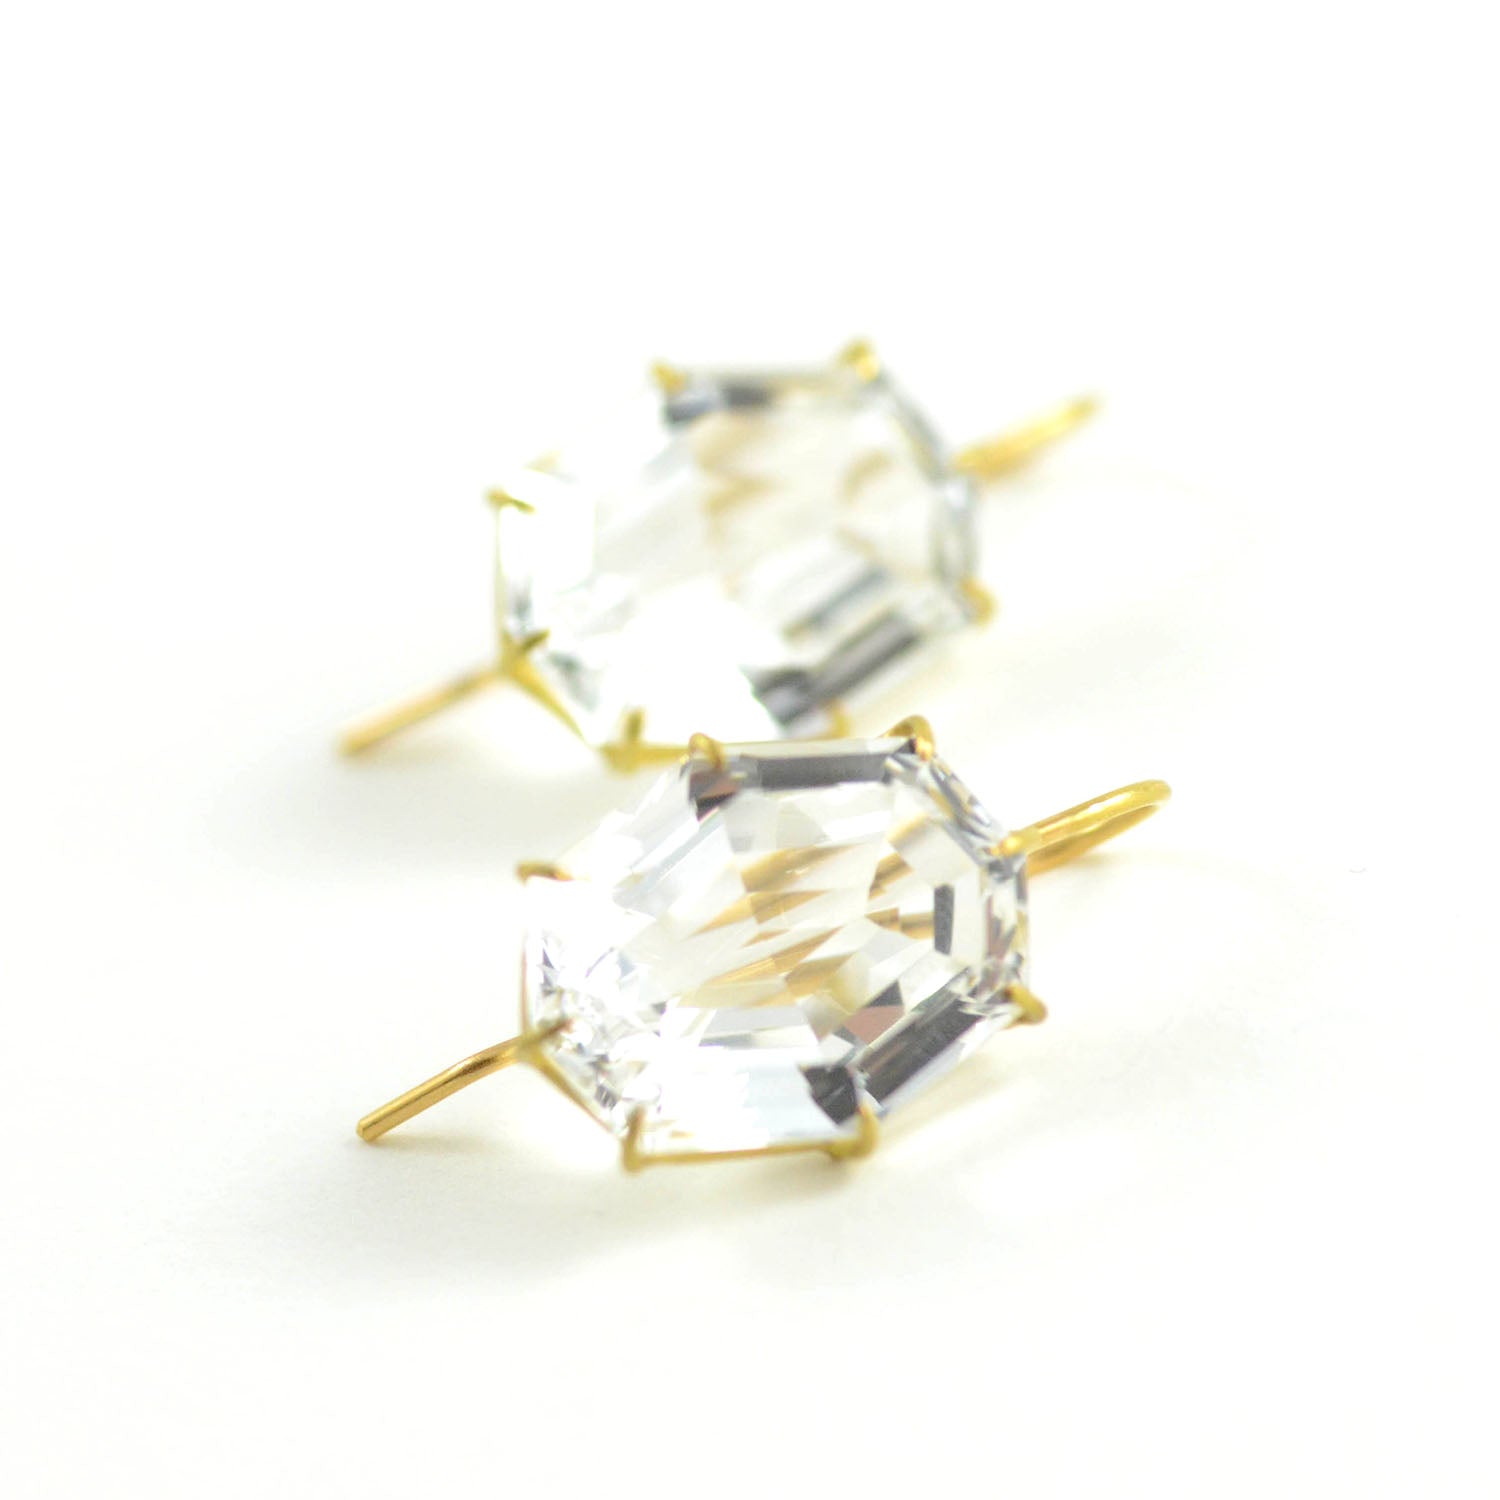 Faceted White Topaz North/South Earrings